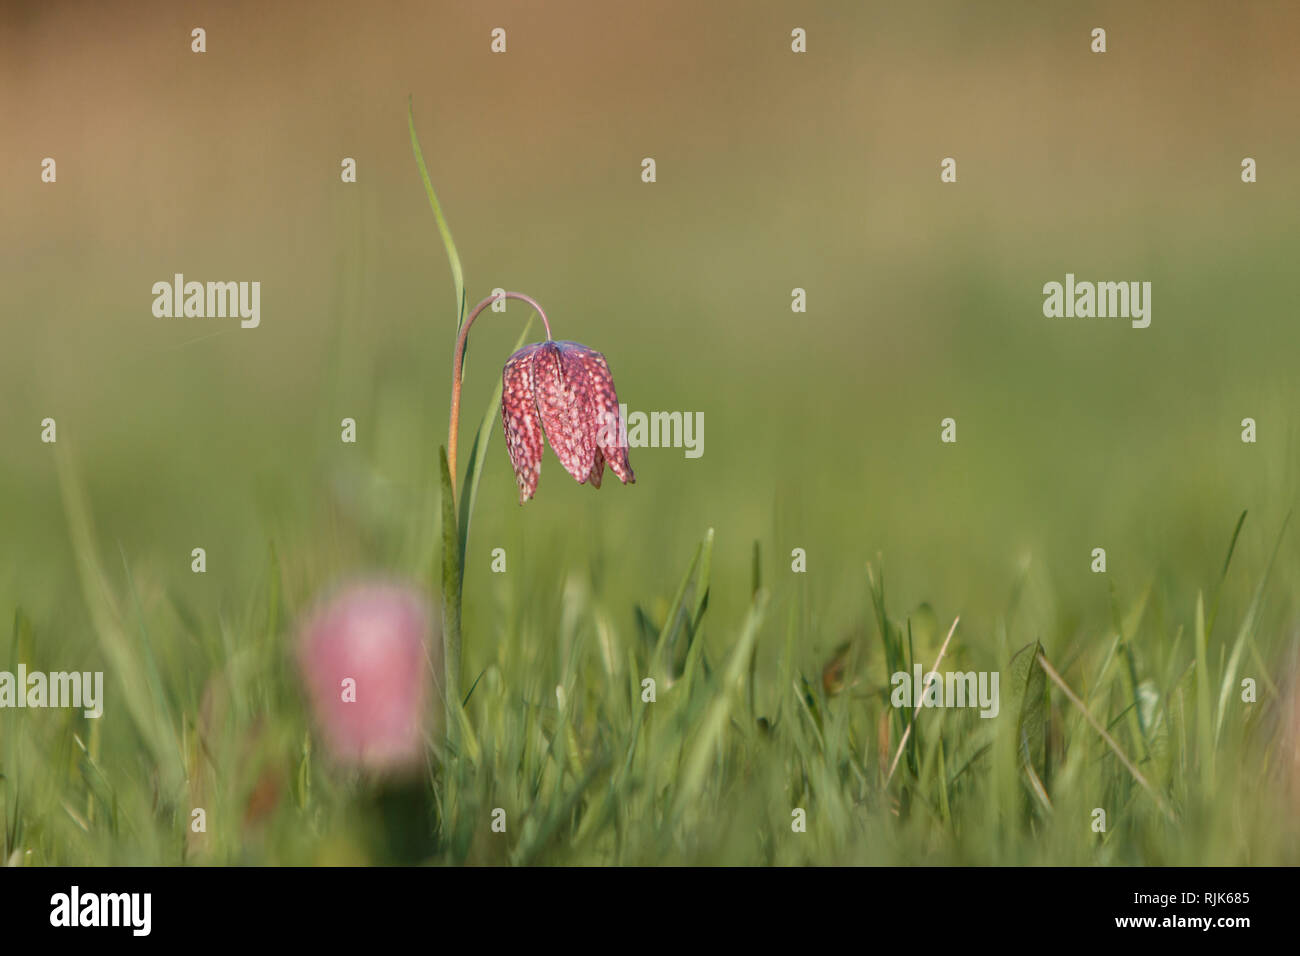 The beautiful fritillary named Snake's Head with a pink and purple chequered flower with a calm green background. Stock Photo